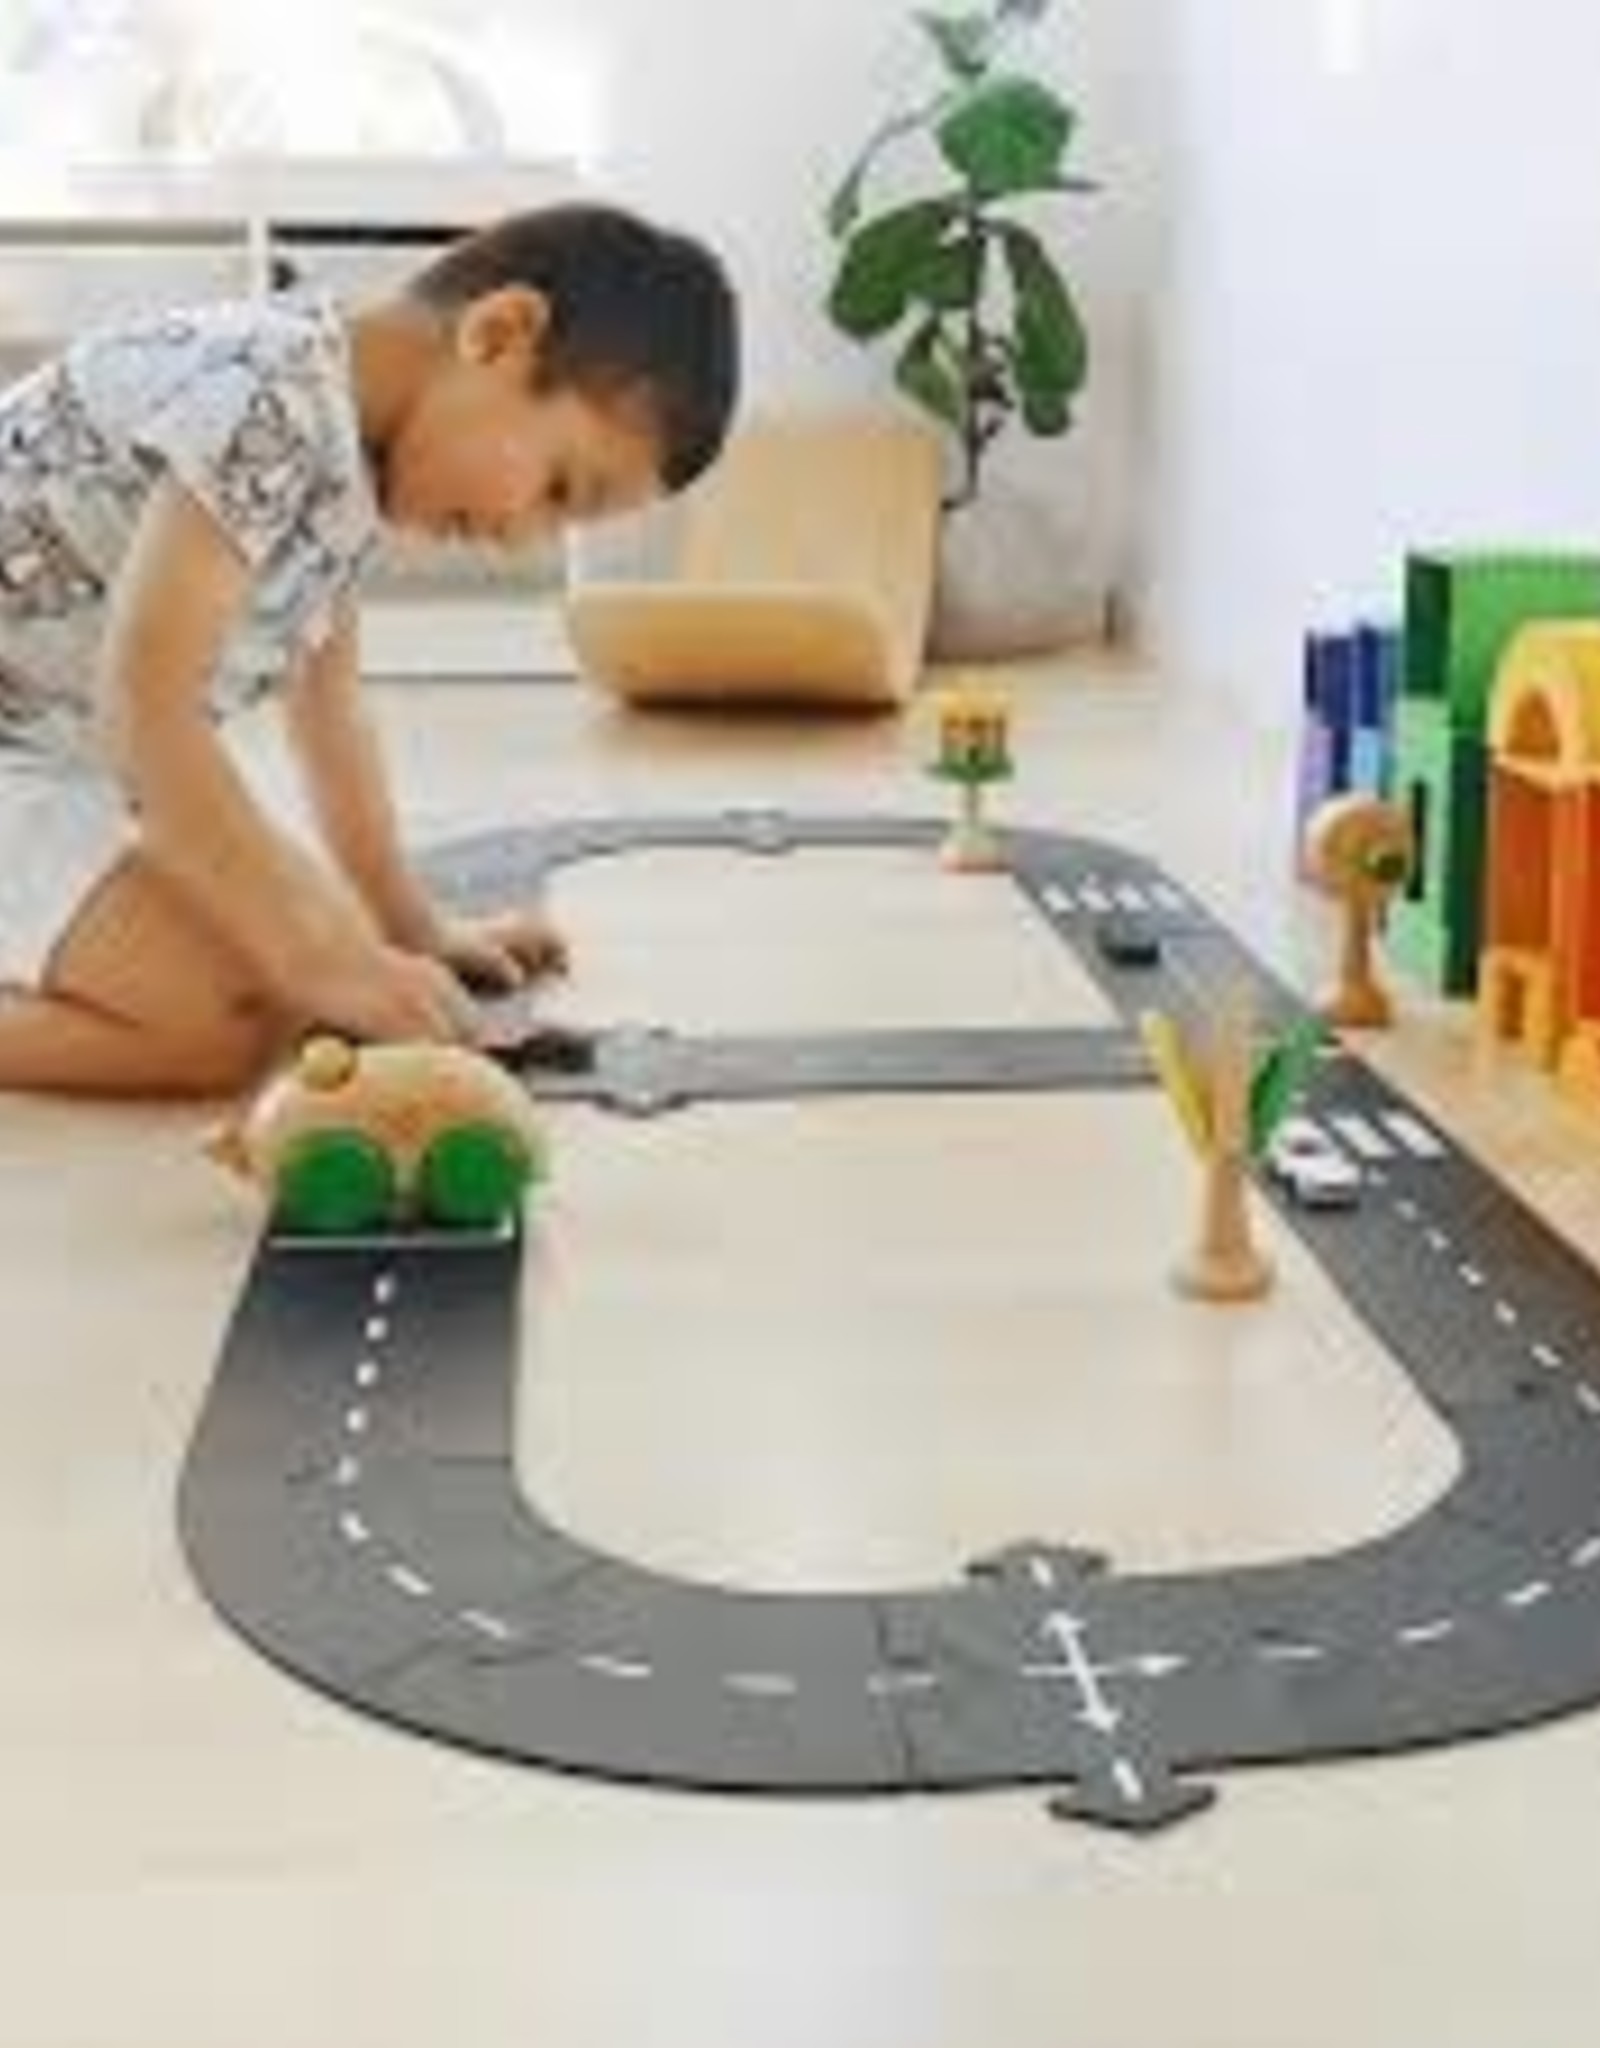 Waytoplay Toys King of the Road Road Set, 40 pc.